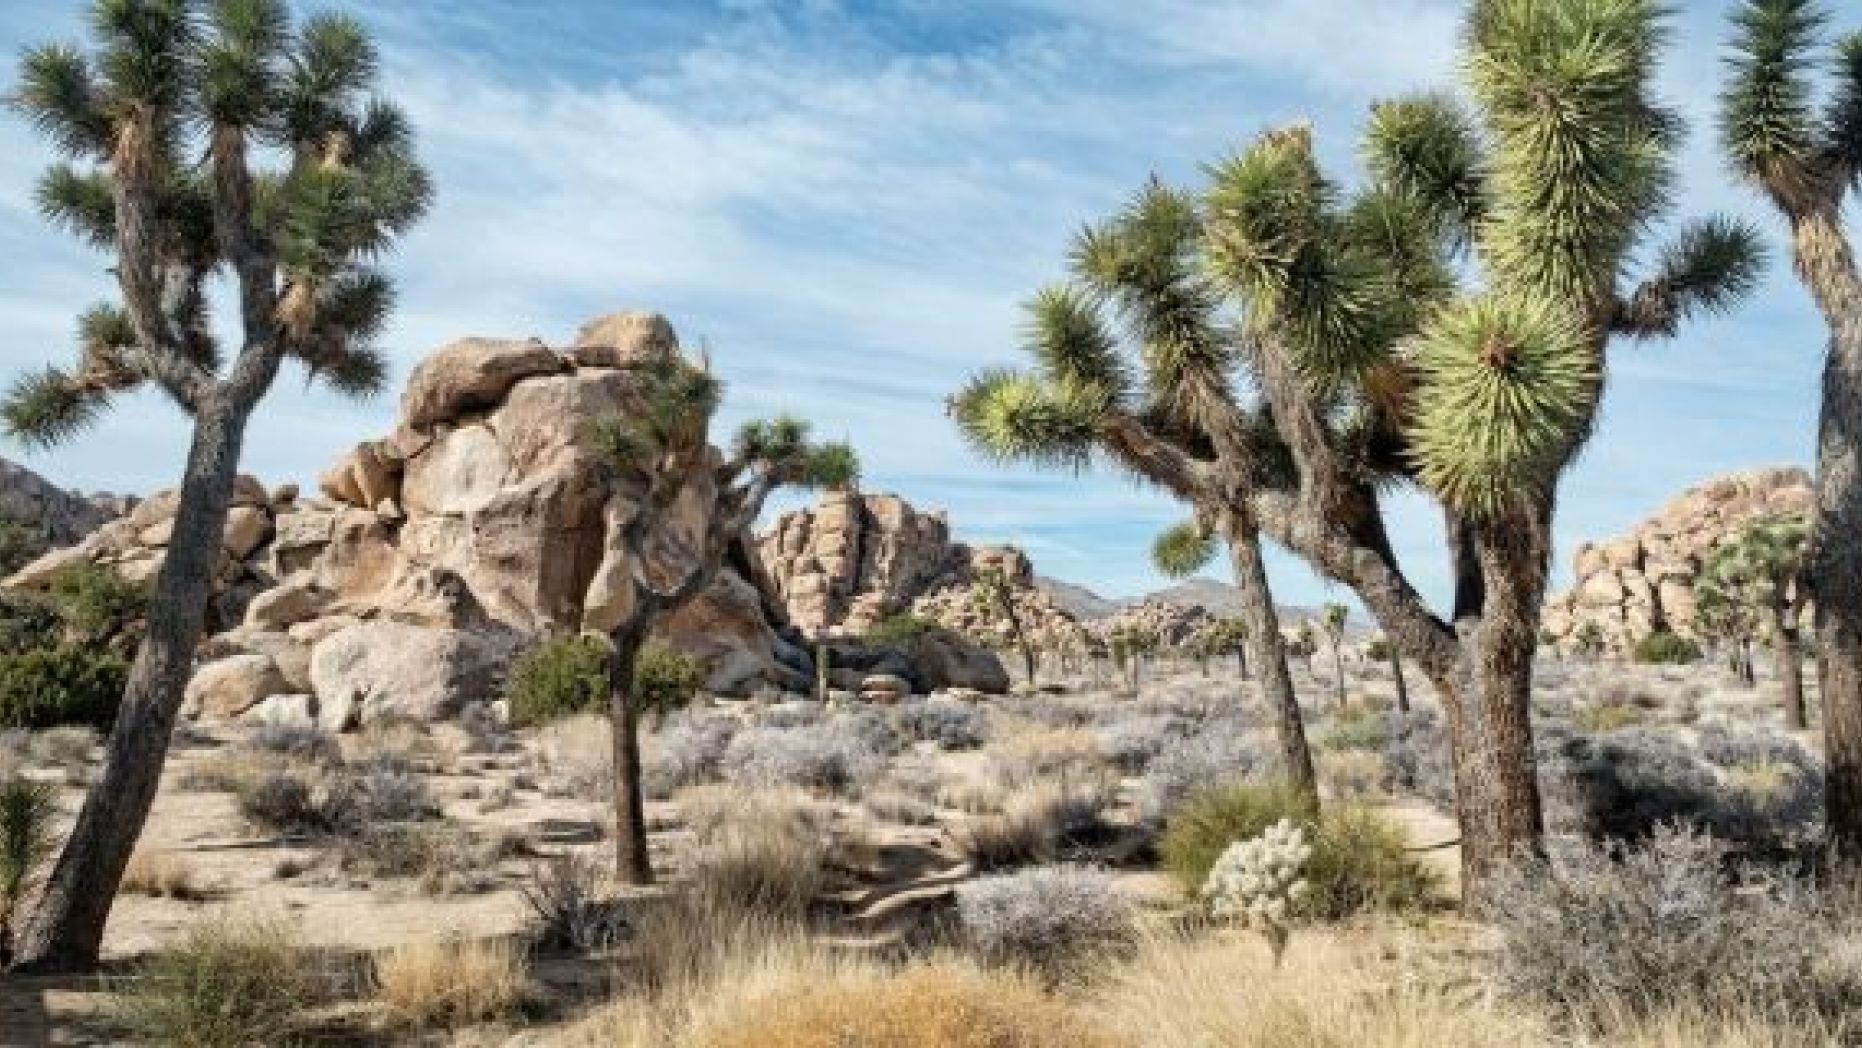 Picture of Joshua Tree National Park in California.  Michaellob Ultra sends one brand new beer to at least six national parks, including the Joshua Tree "Chief Research Officer." (IStack)